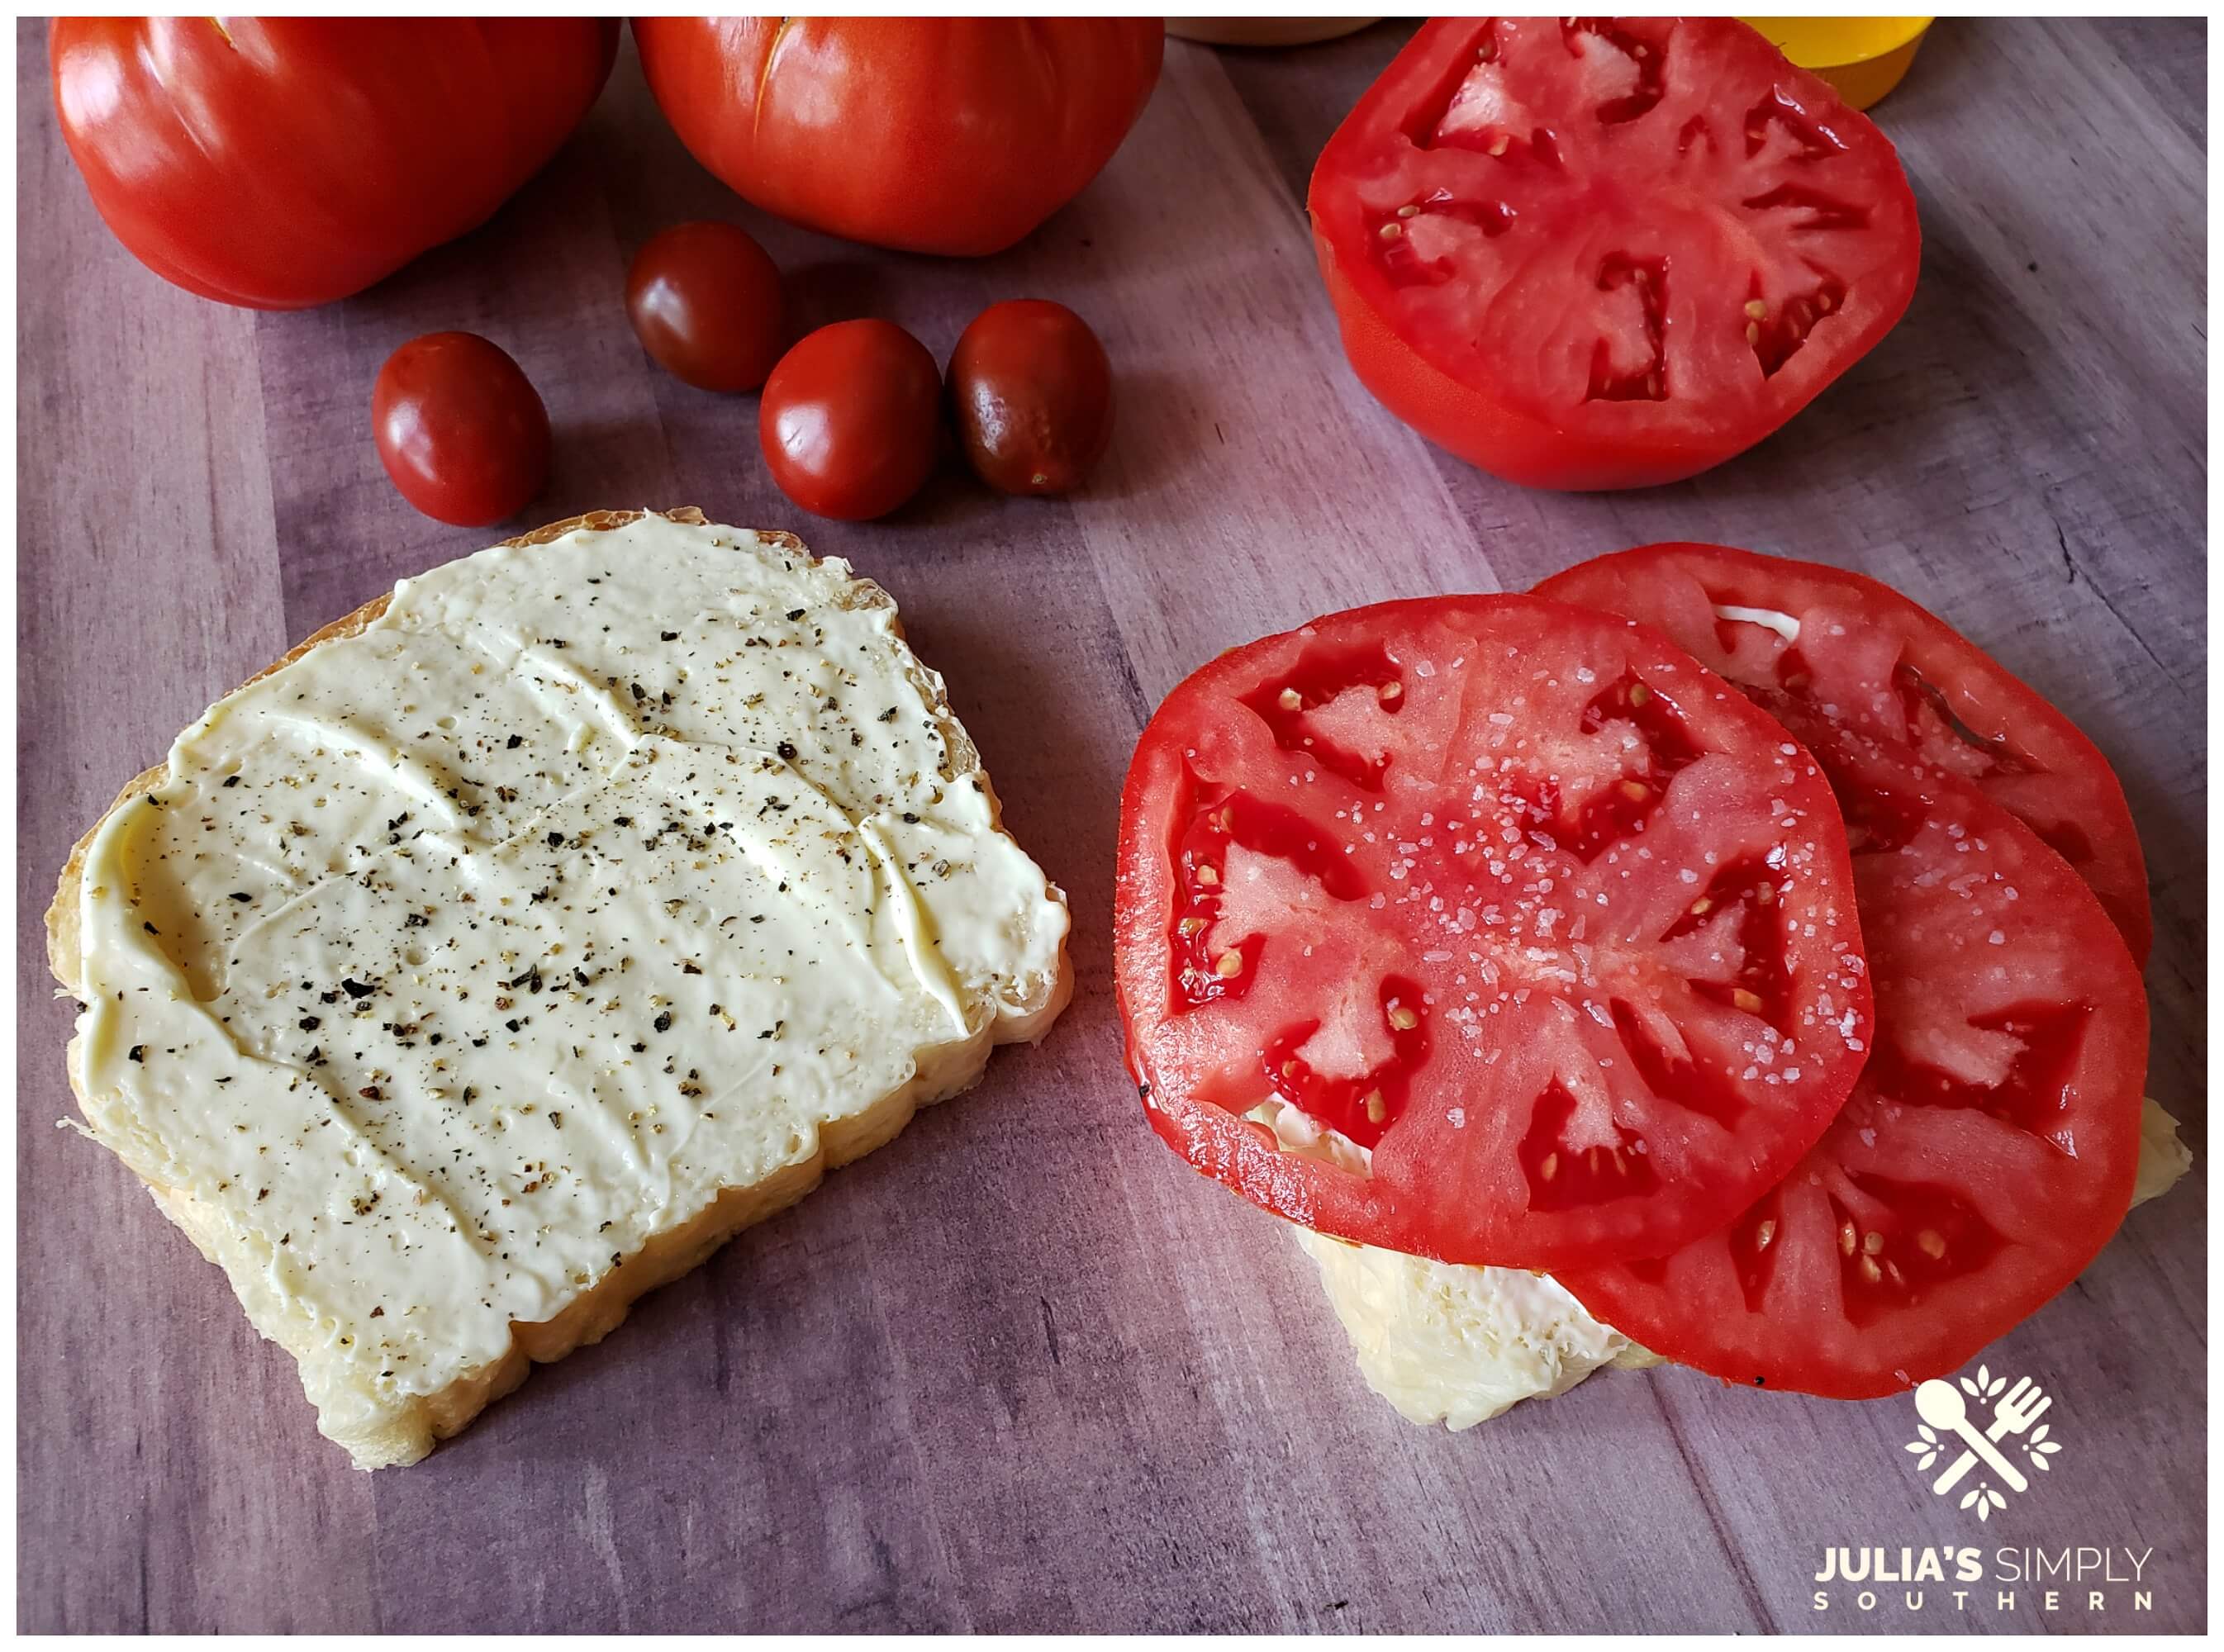 Building the perfect Southern tomato sandwich